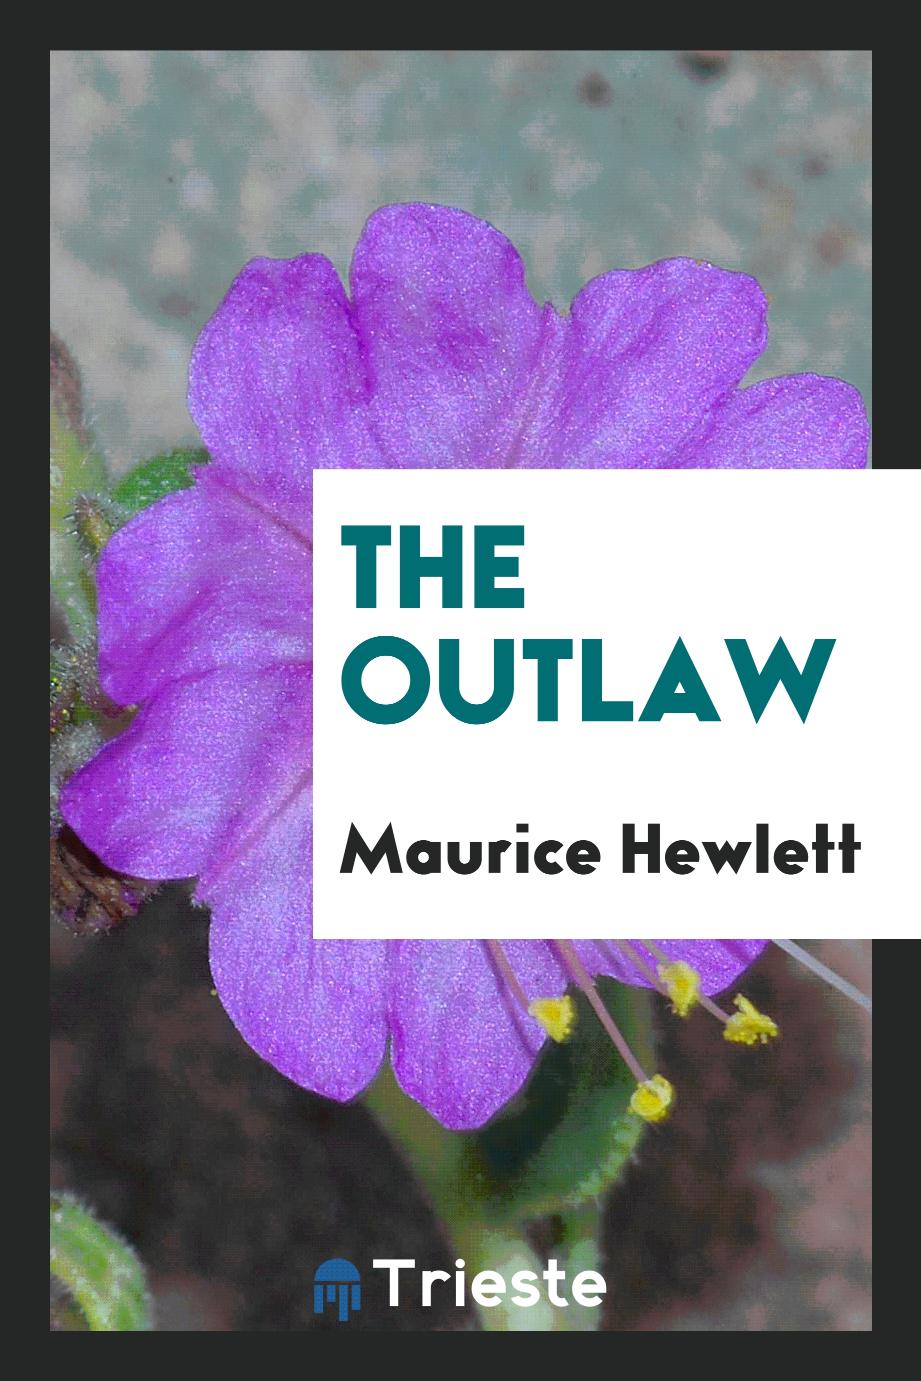 Maurice Hewlett - The outlaw